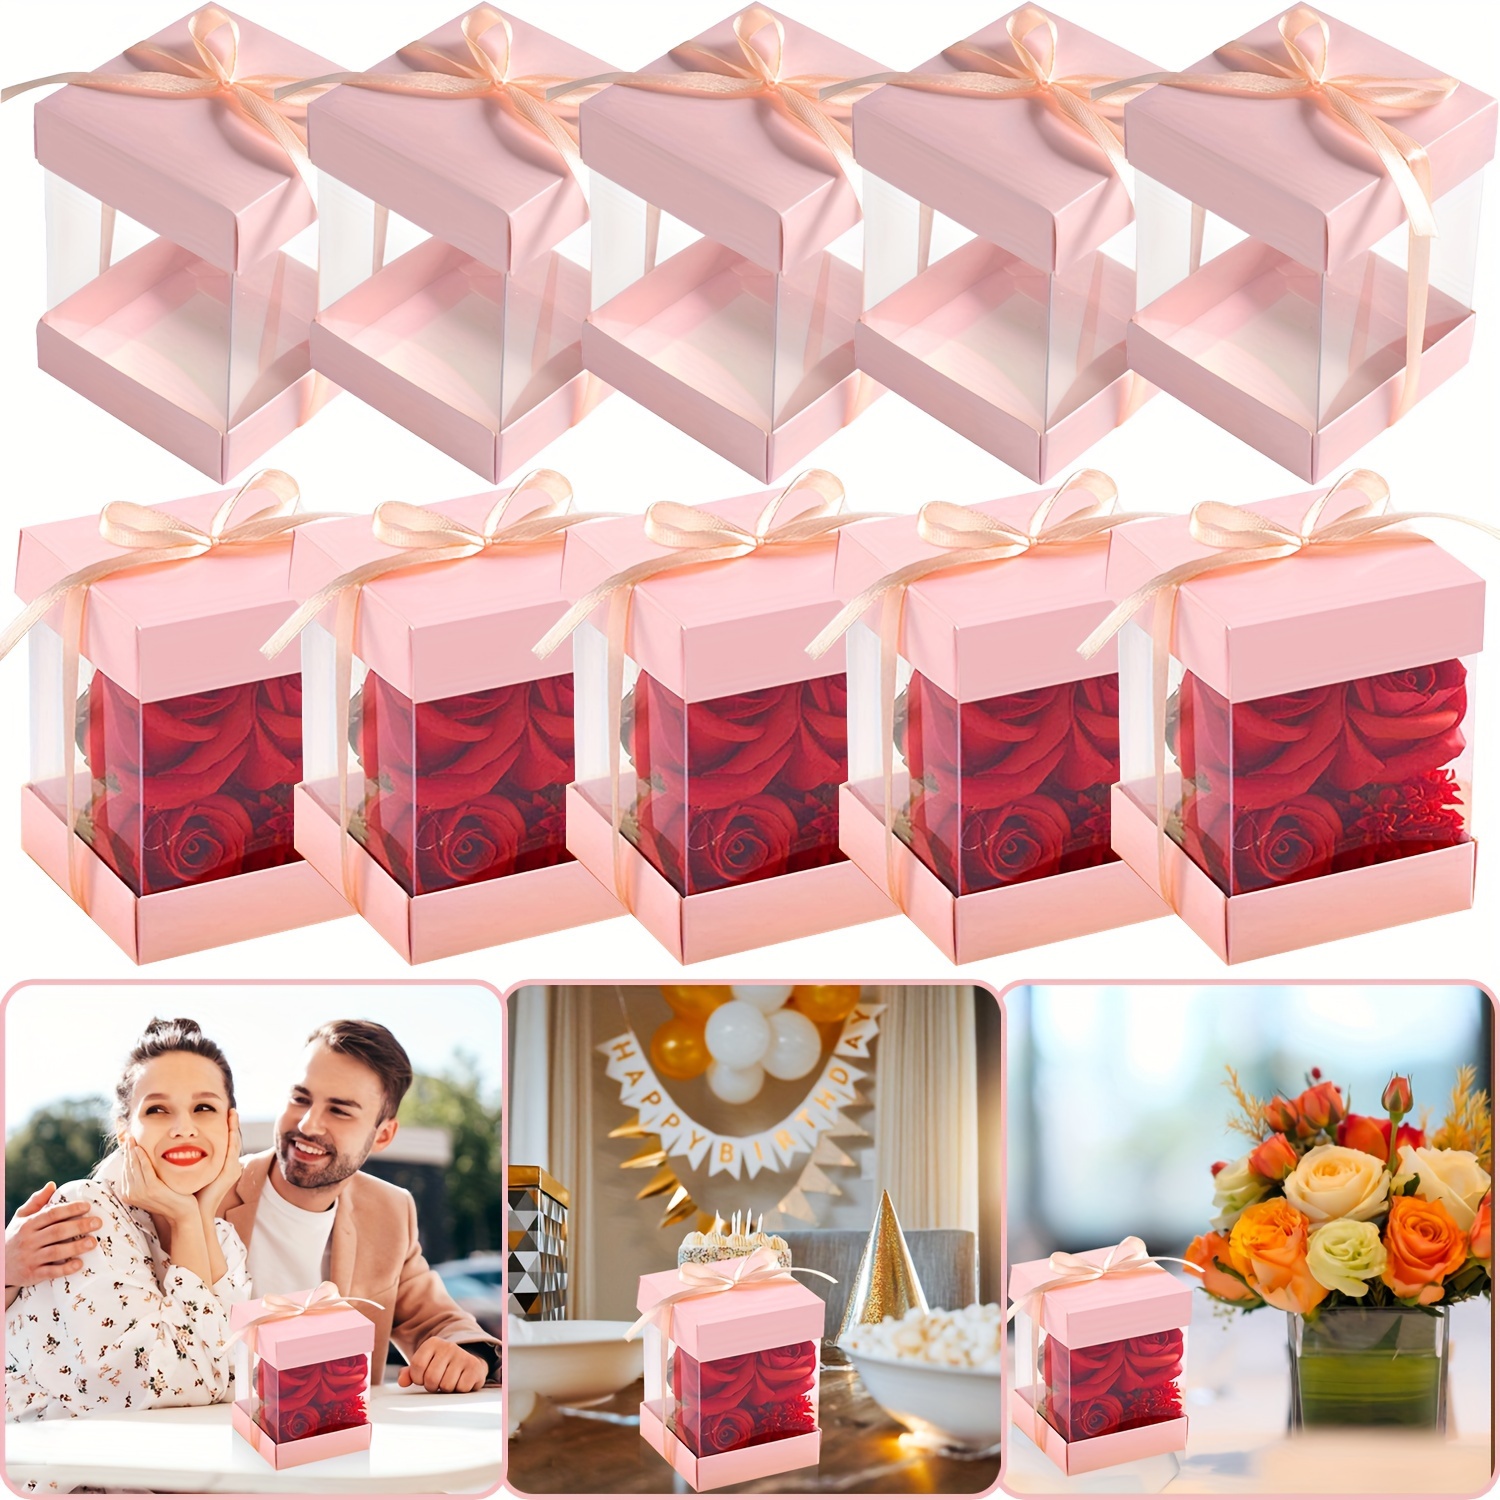 

10pcs Transparent Candy Gift Box, Pvc Plastic Boxes Gift Boxes For Wedding Party Favors,birthday Presents, Candy, Cupcakes, Jewelry Wrapping Box